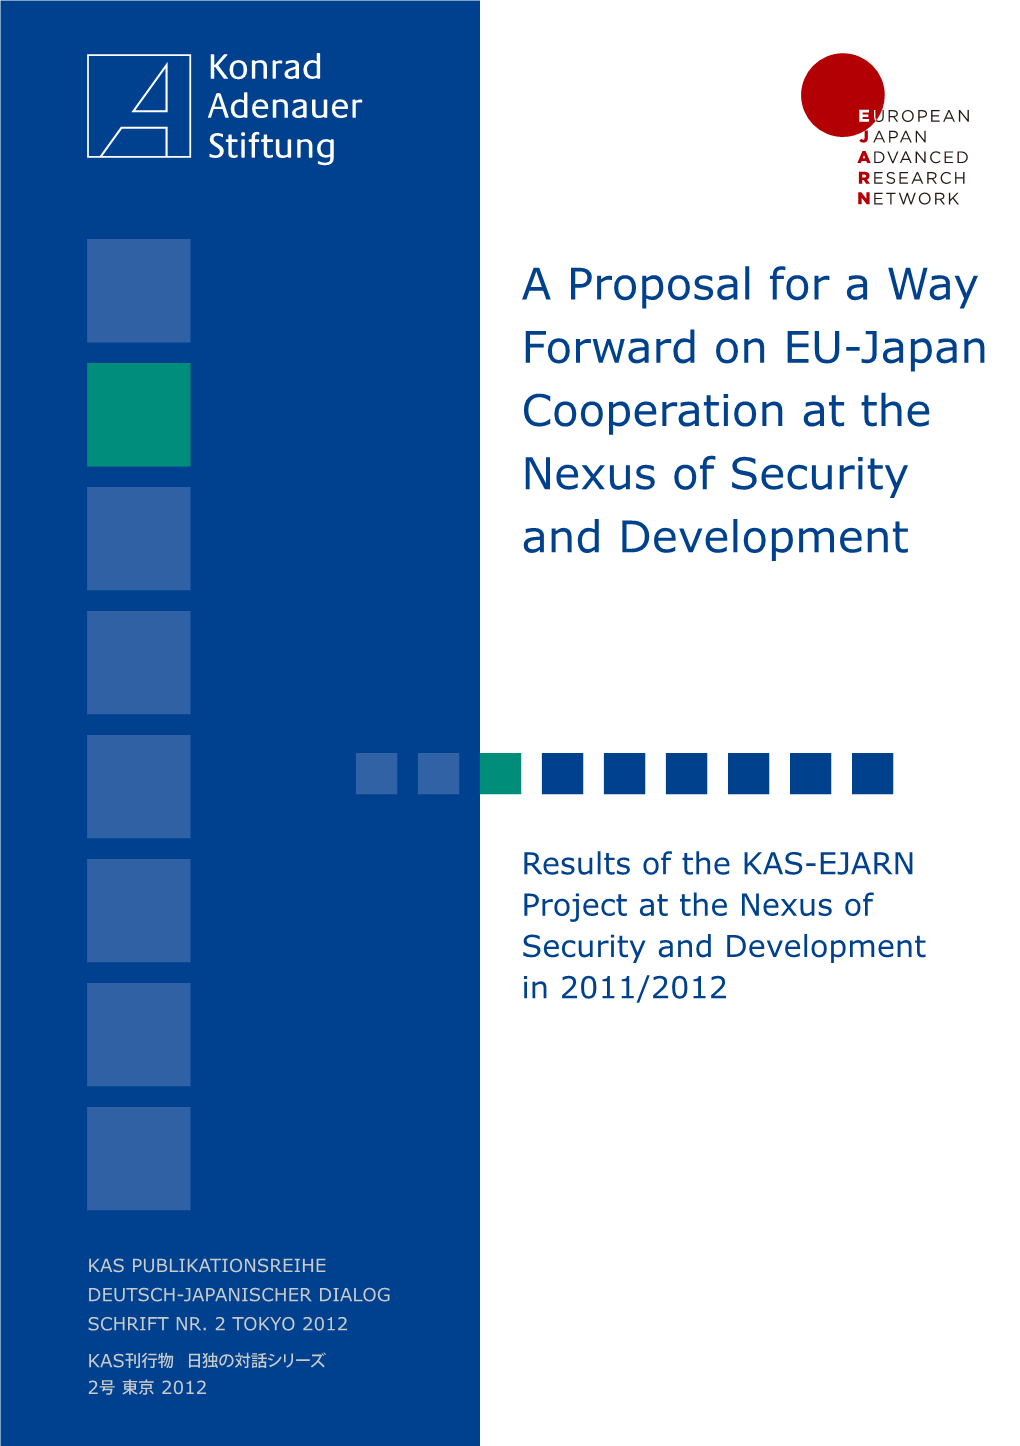 A Proposal for a Way Forward on EU-Japan Cooperation at the Nexus of Security and Development